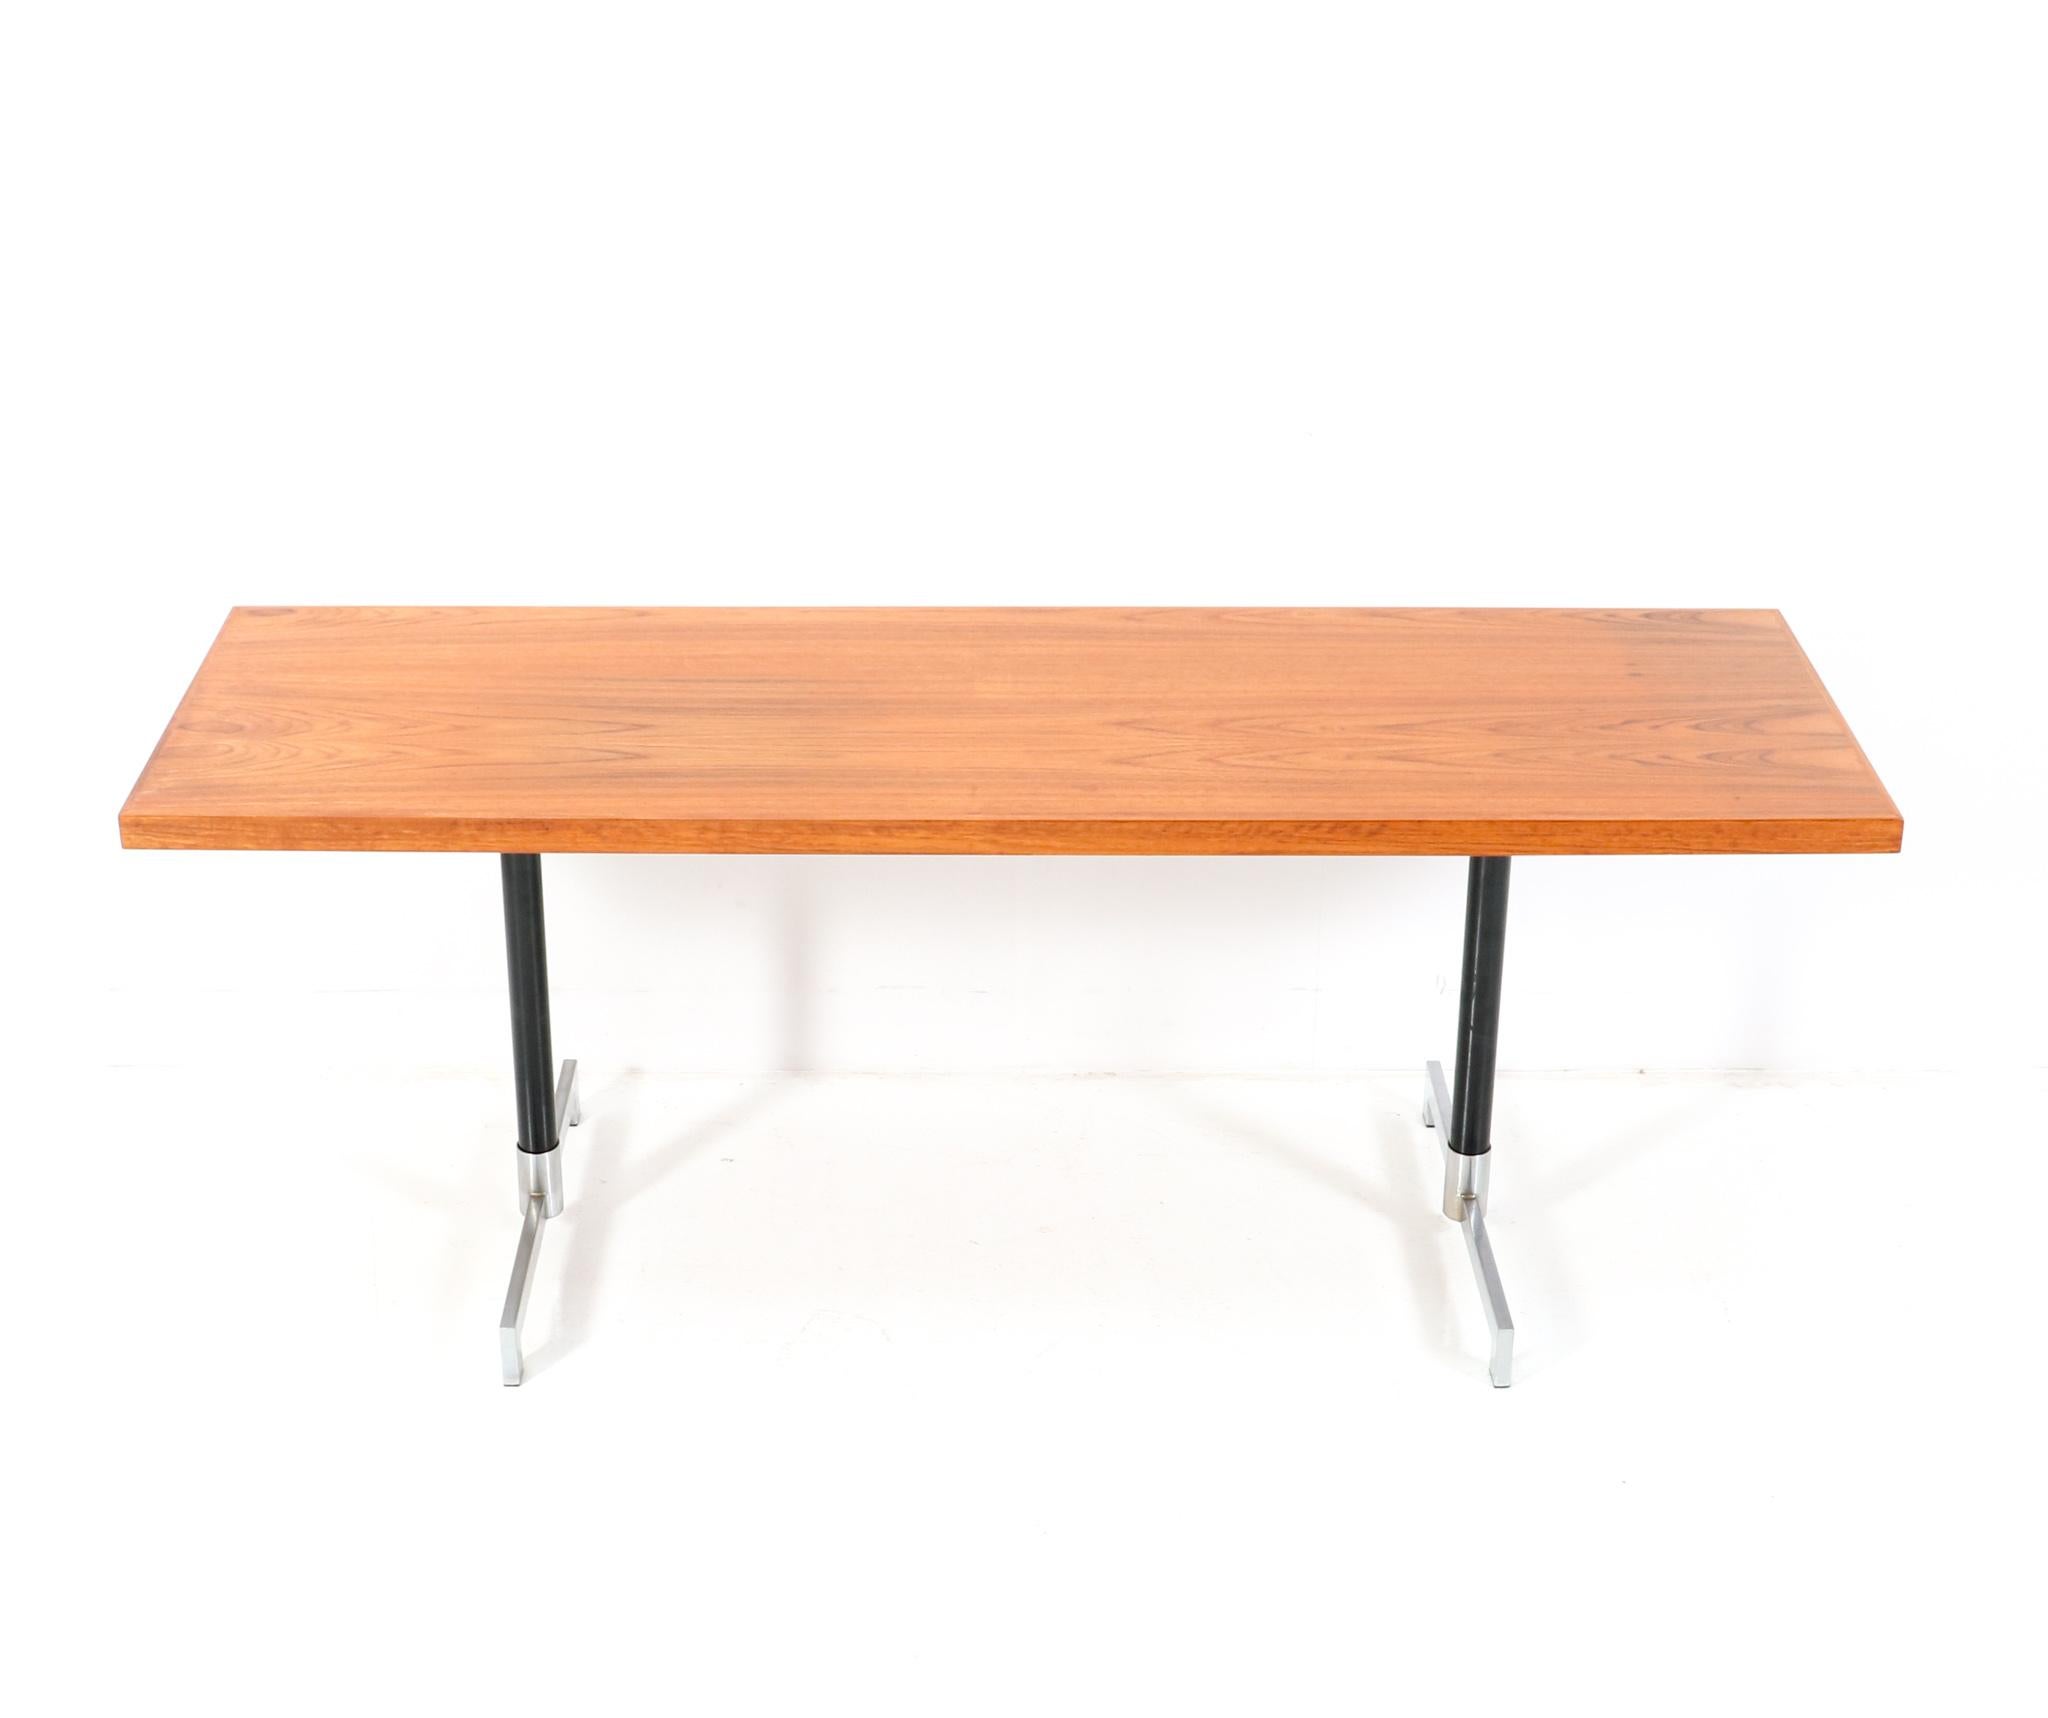 Danish Mid-Century Modern Teak Console Table or Writing Table, 1960s For Sale